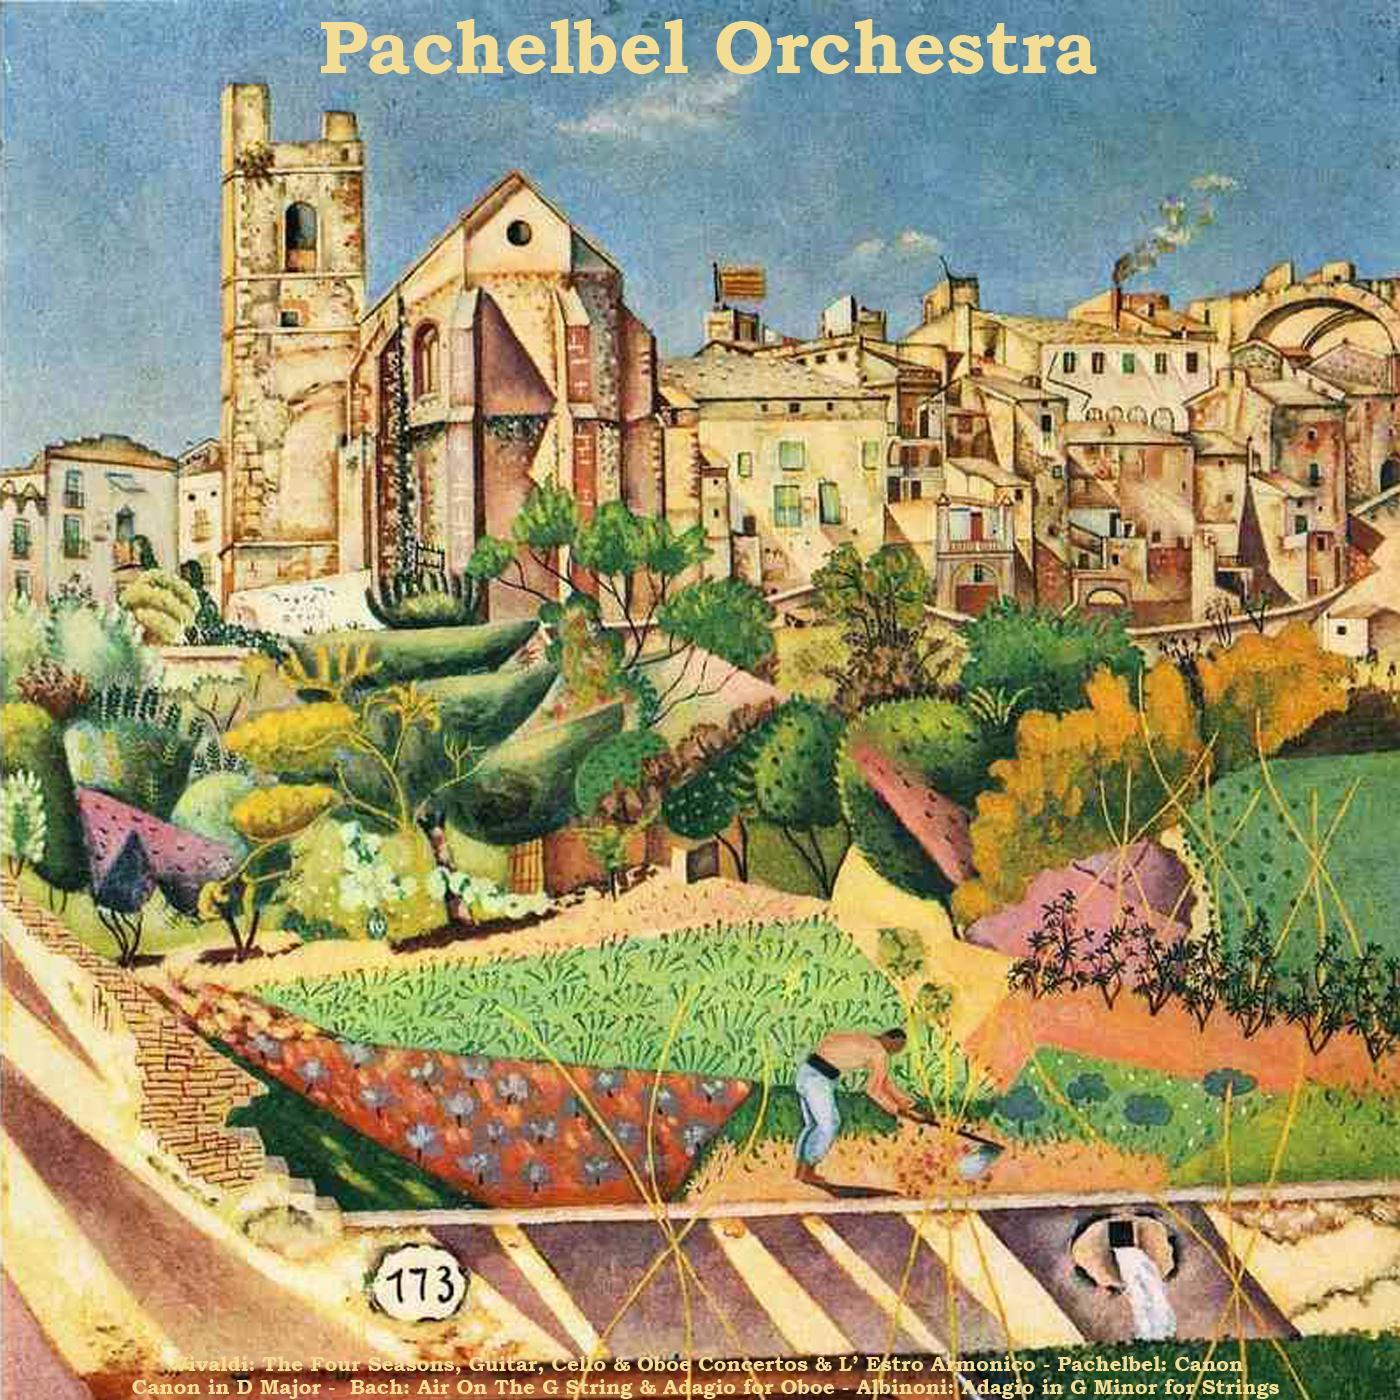 Pachelbel Orchestra - Concerto for Oboe and Strings in C Major, Rv 451: II. Larghetto